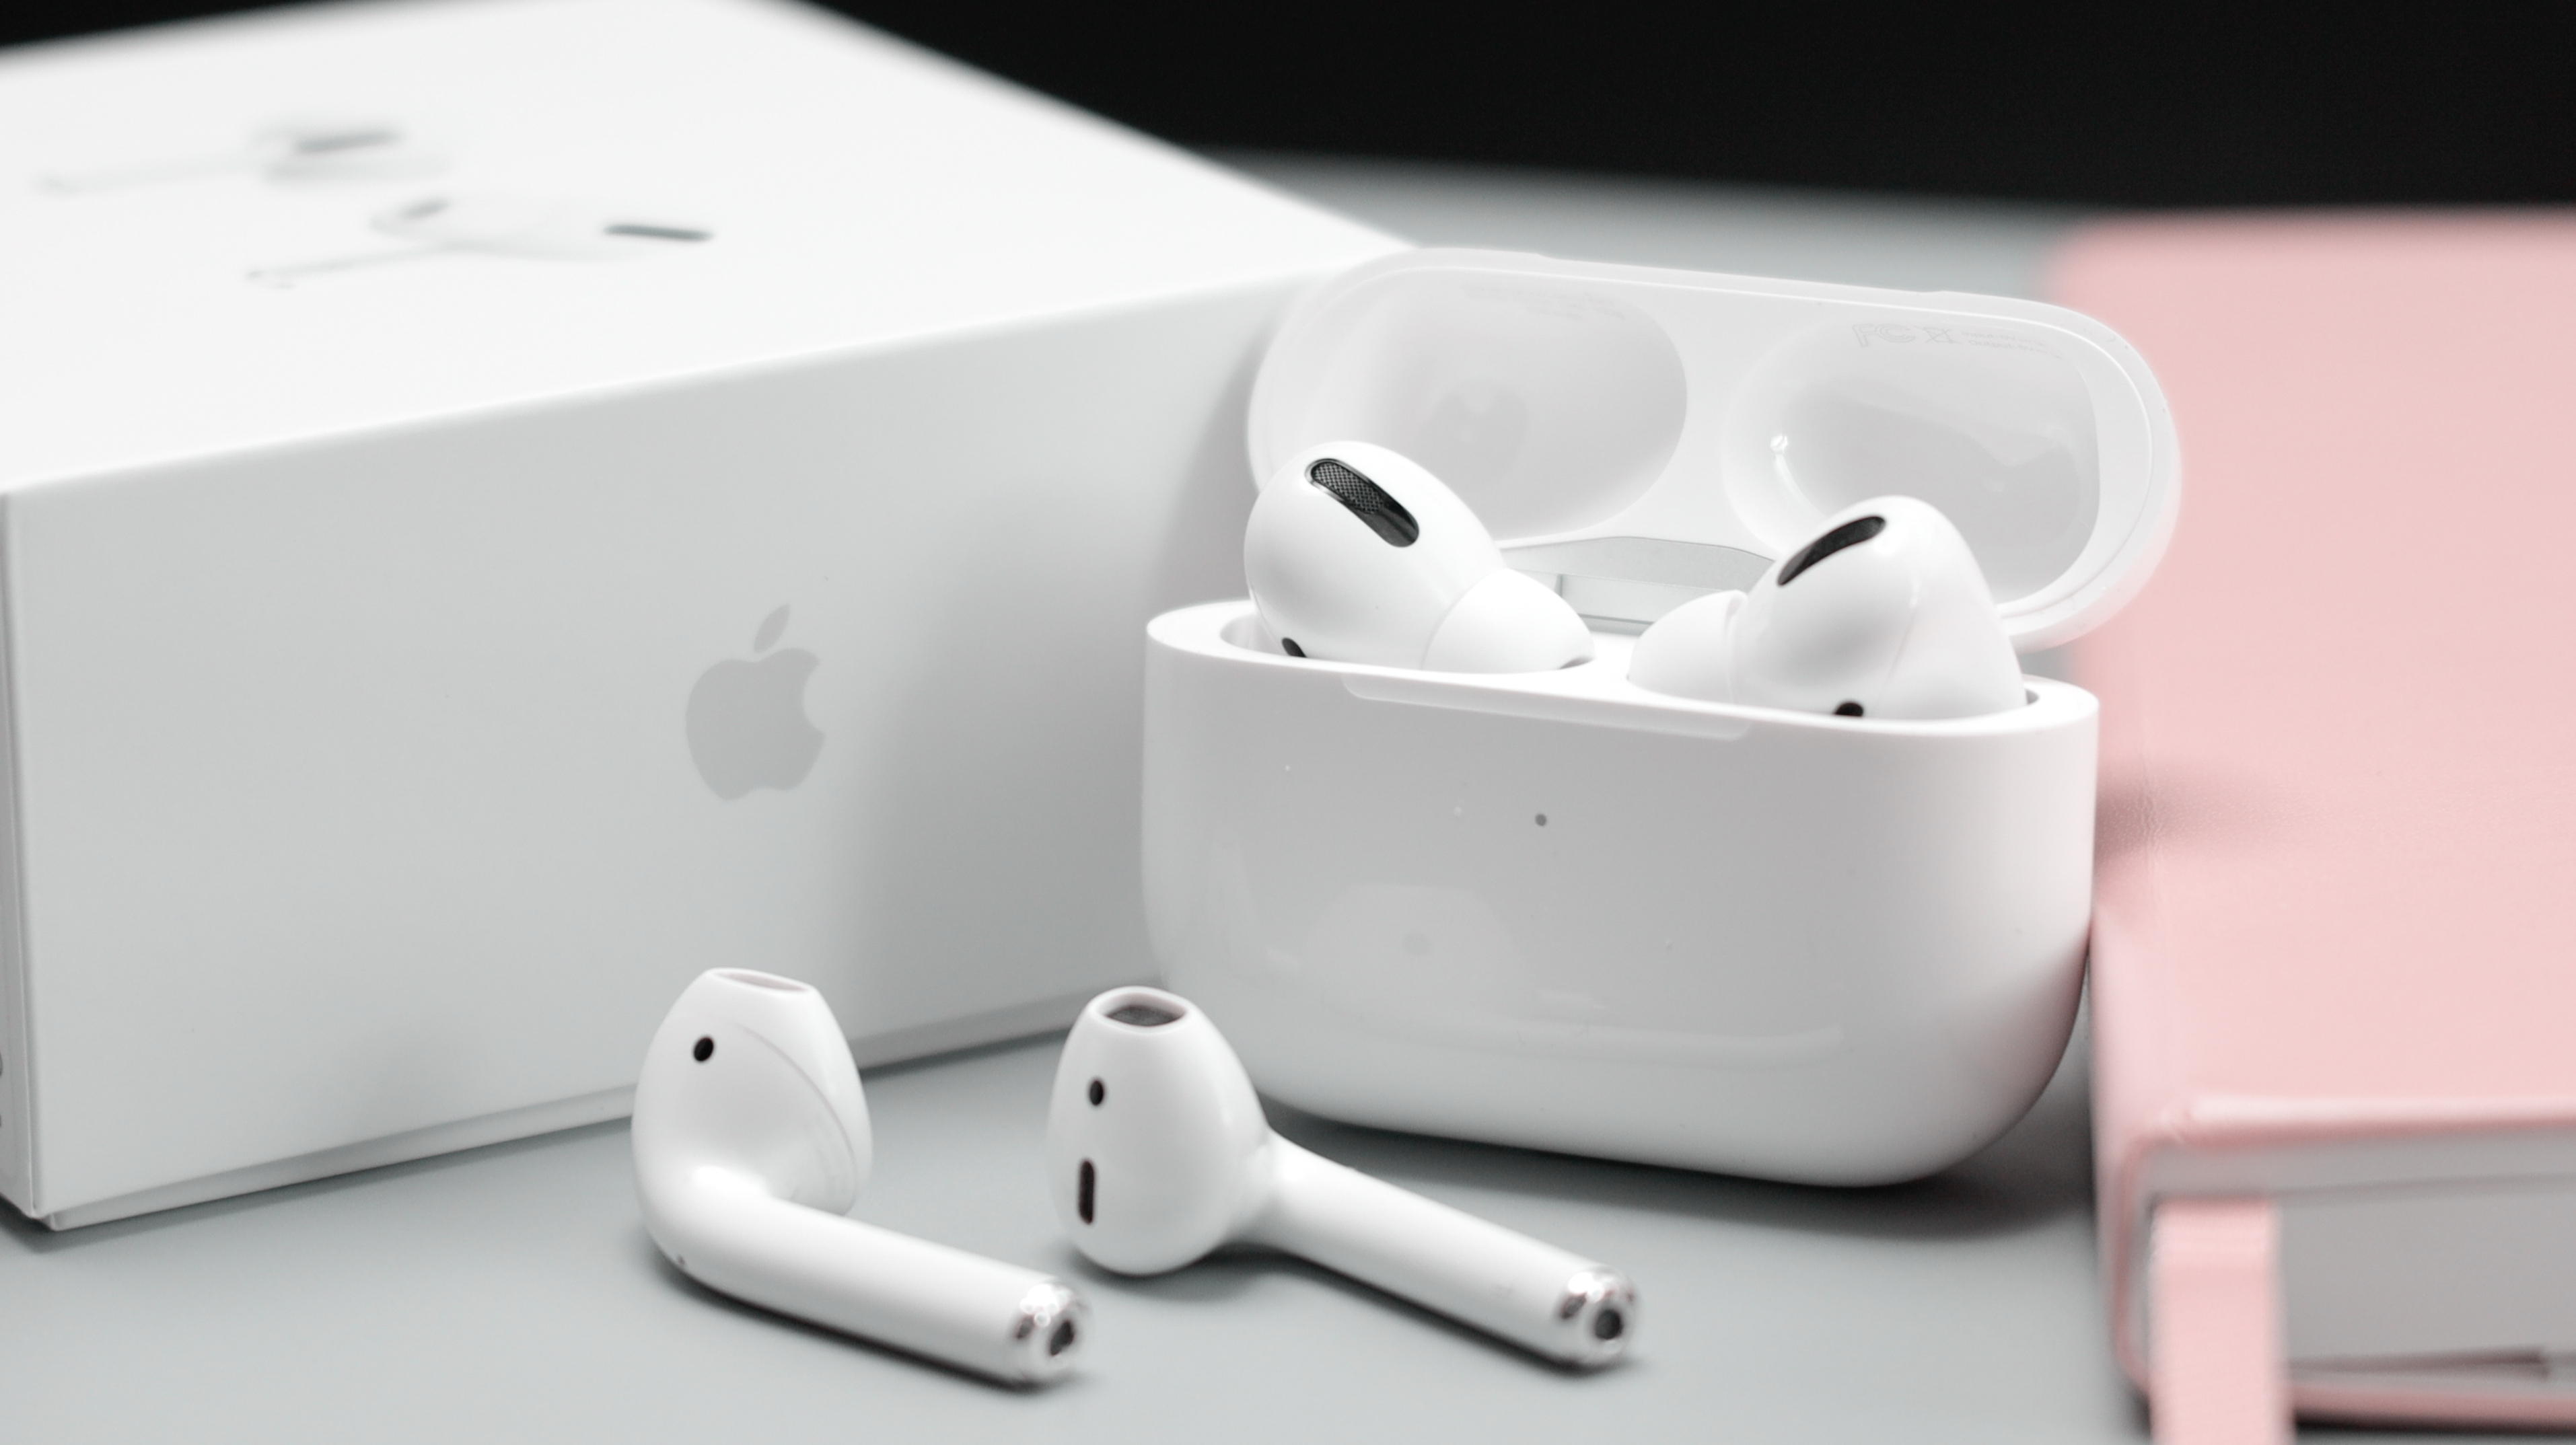 Airpods 2 huilian. Apple AIRPODS 2. Эппл аирподс 3. Apple AIRPODS Pro 2. Apple AIRPODS Pro 3.